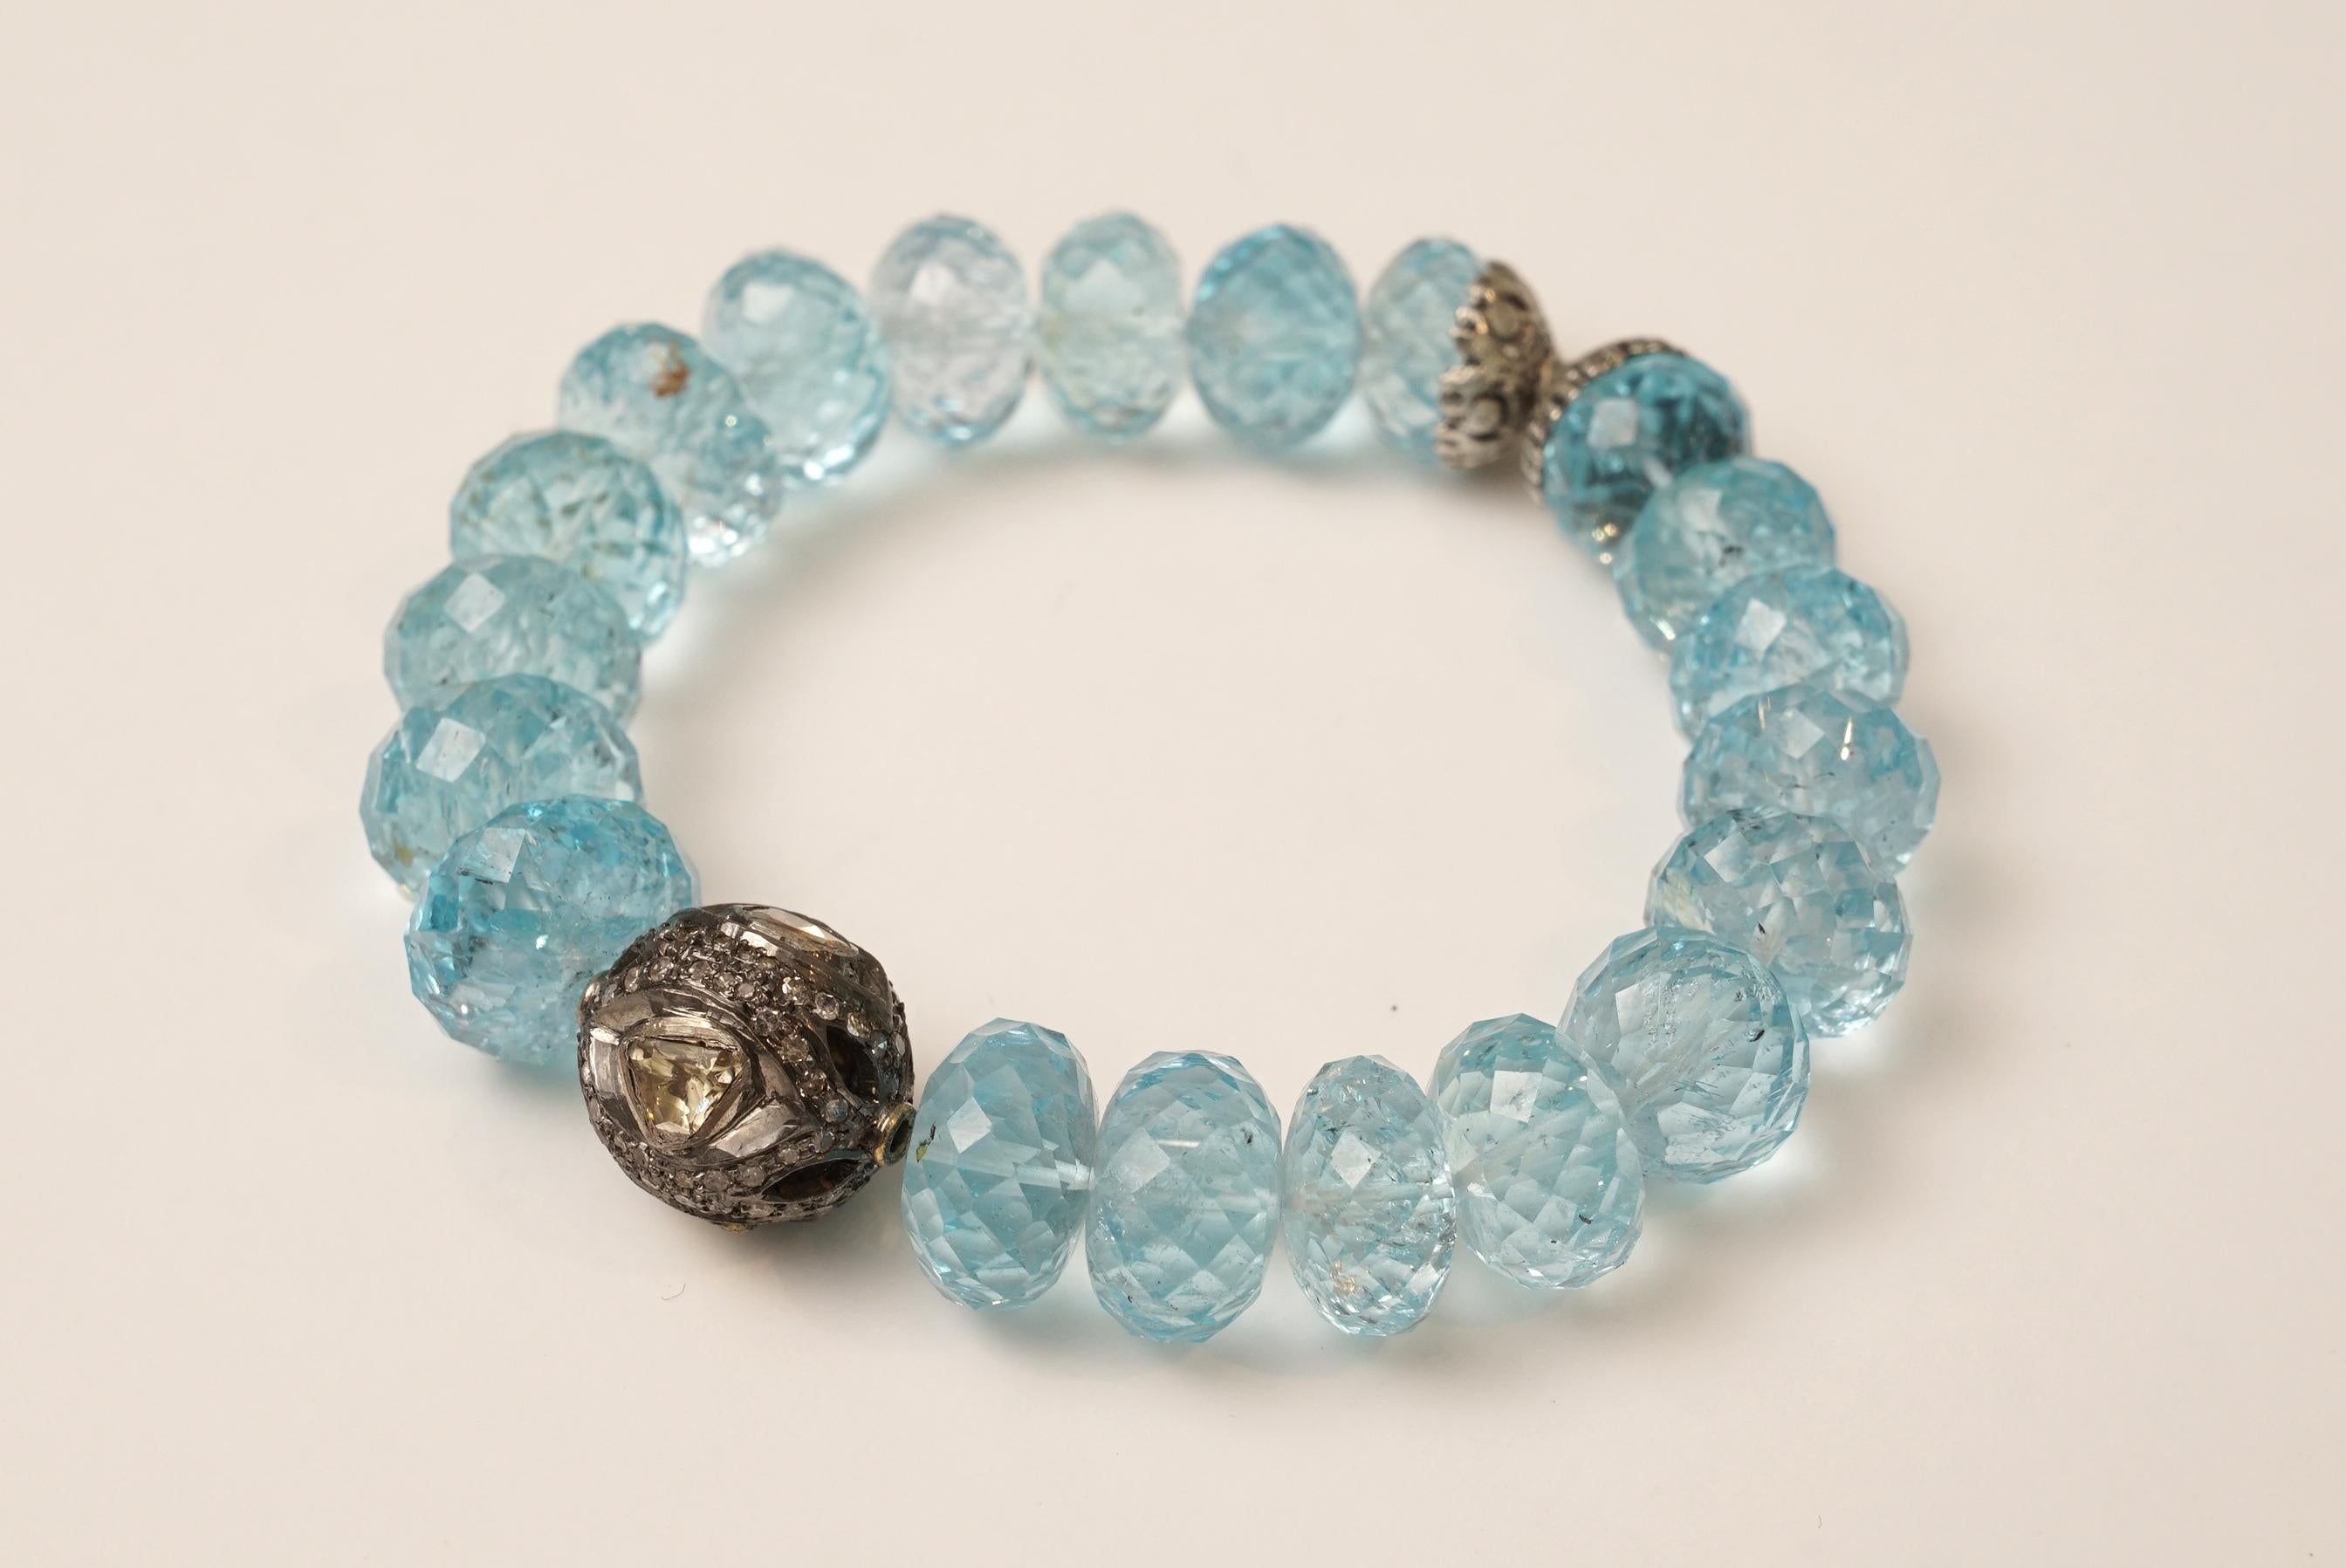 Lovely faceted blue topaz beaded bracelet with sterling silver with 4 rose cut diamonds surrounded by pave`-set diamonds on the center bead and two sterling silver end caps opposite.  Strung on a nylon stretch cord for easy on and off.   Great sized